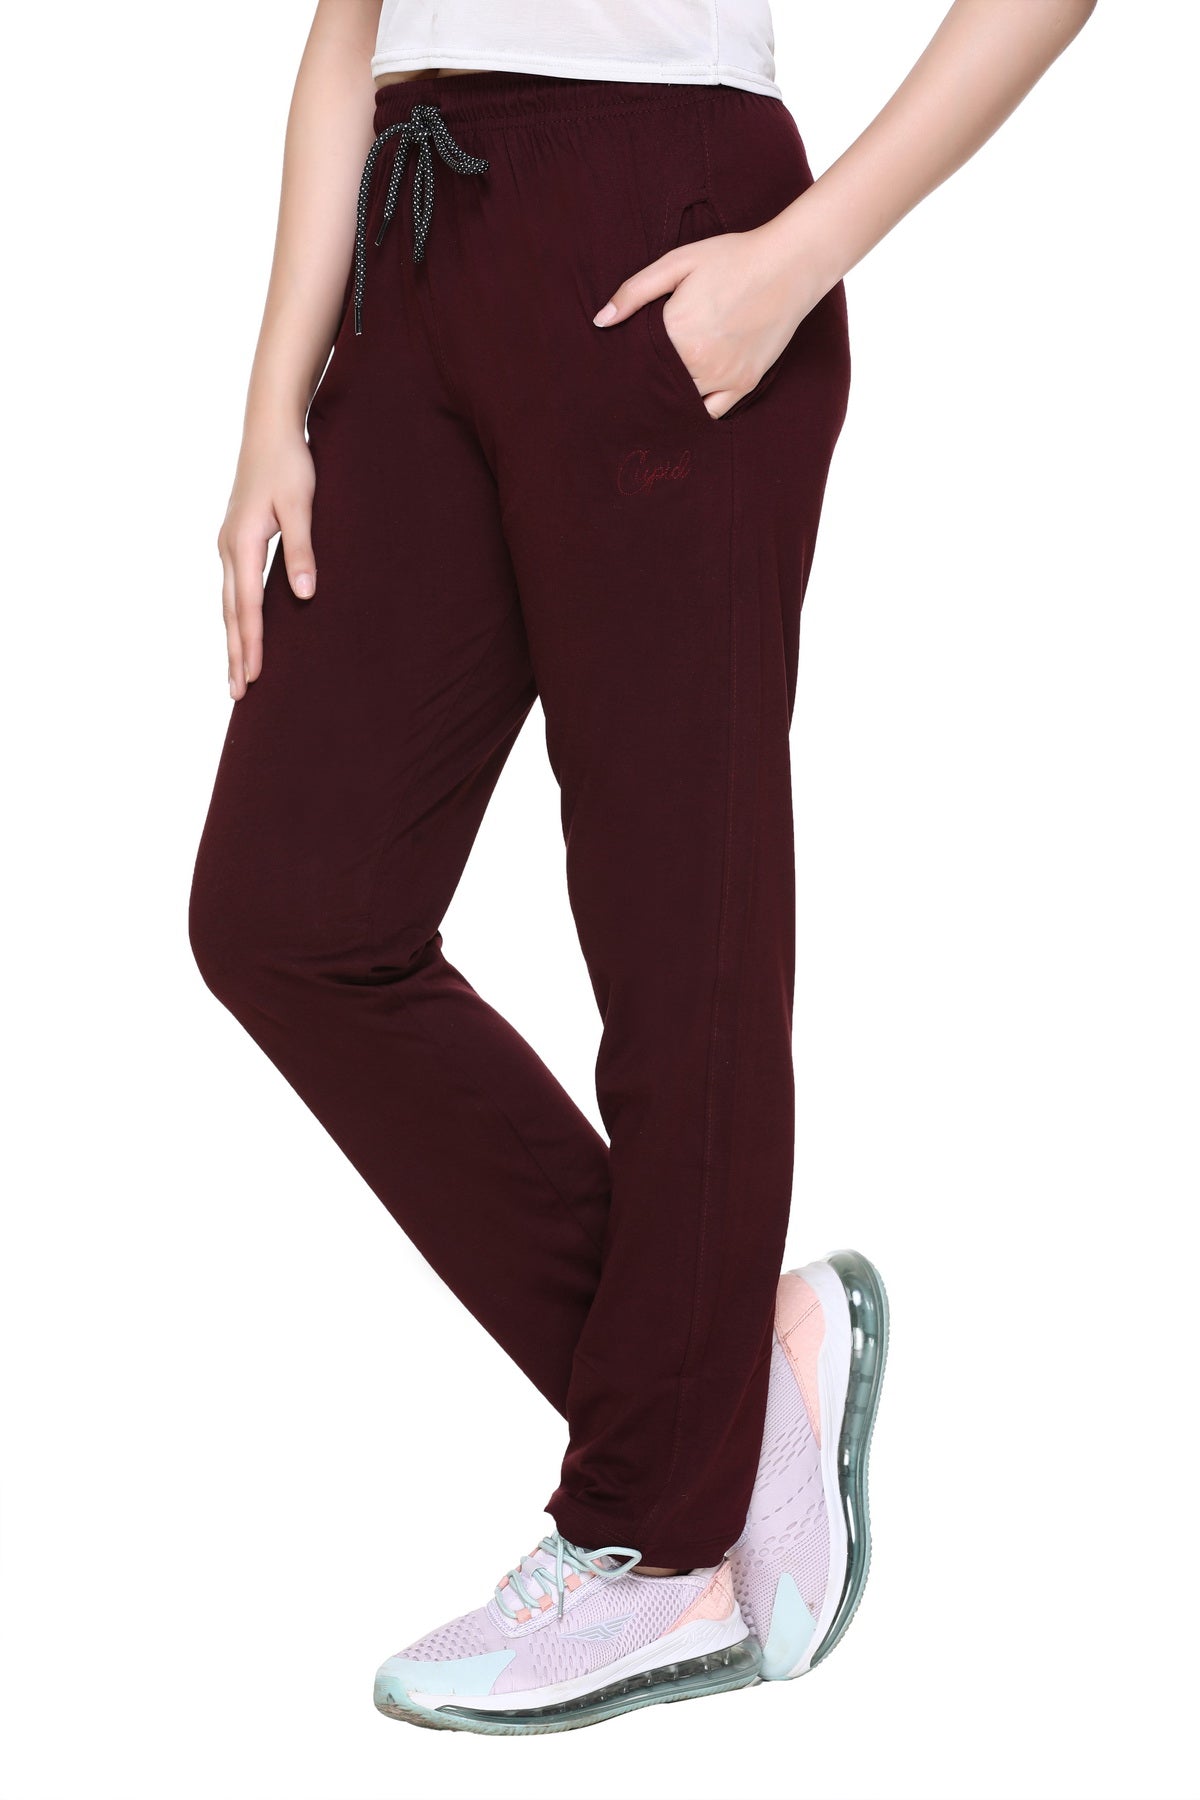 Buy Online Bottle Green Acro Wool Pants for Women  Girls at Best Prices in  Biba IndiaWINTERW16476A